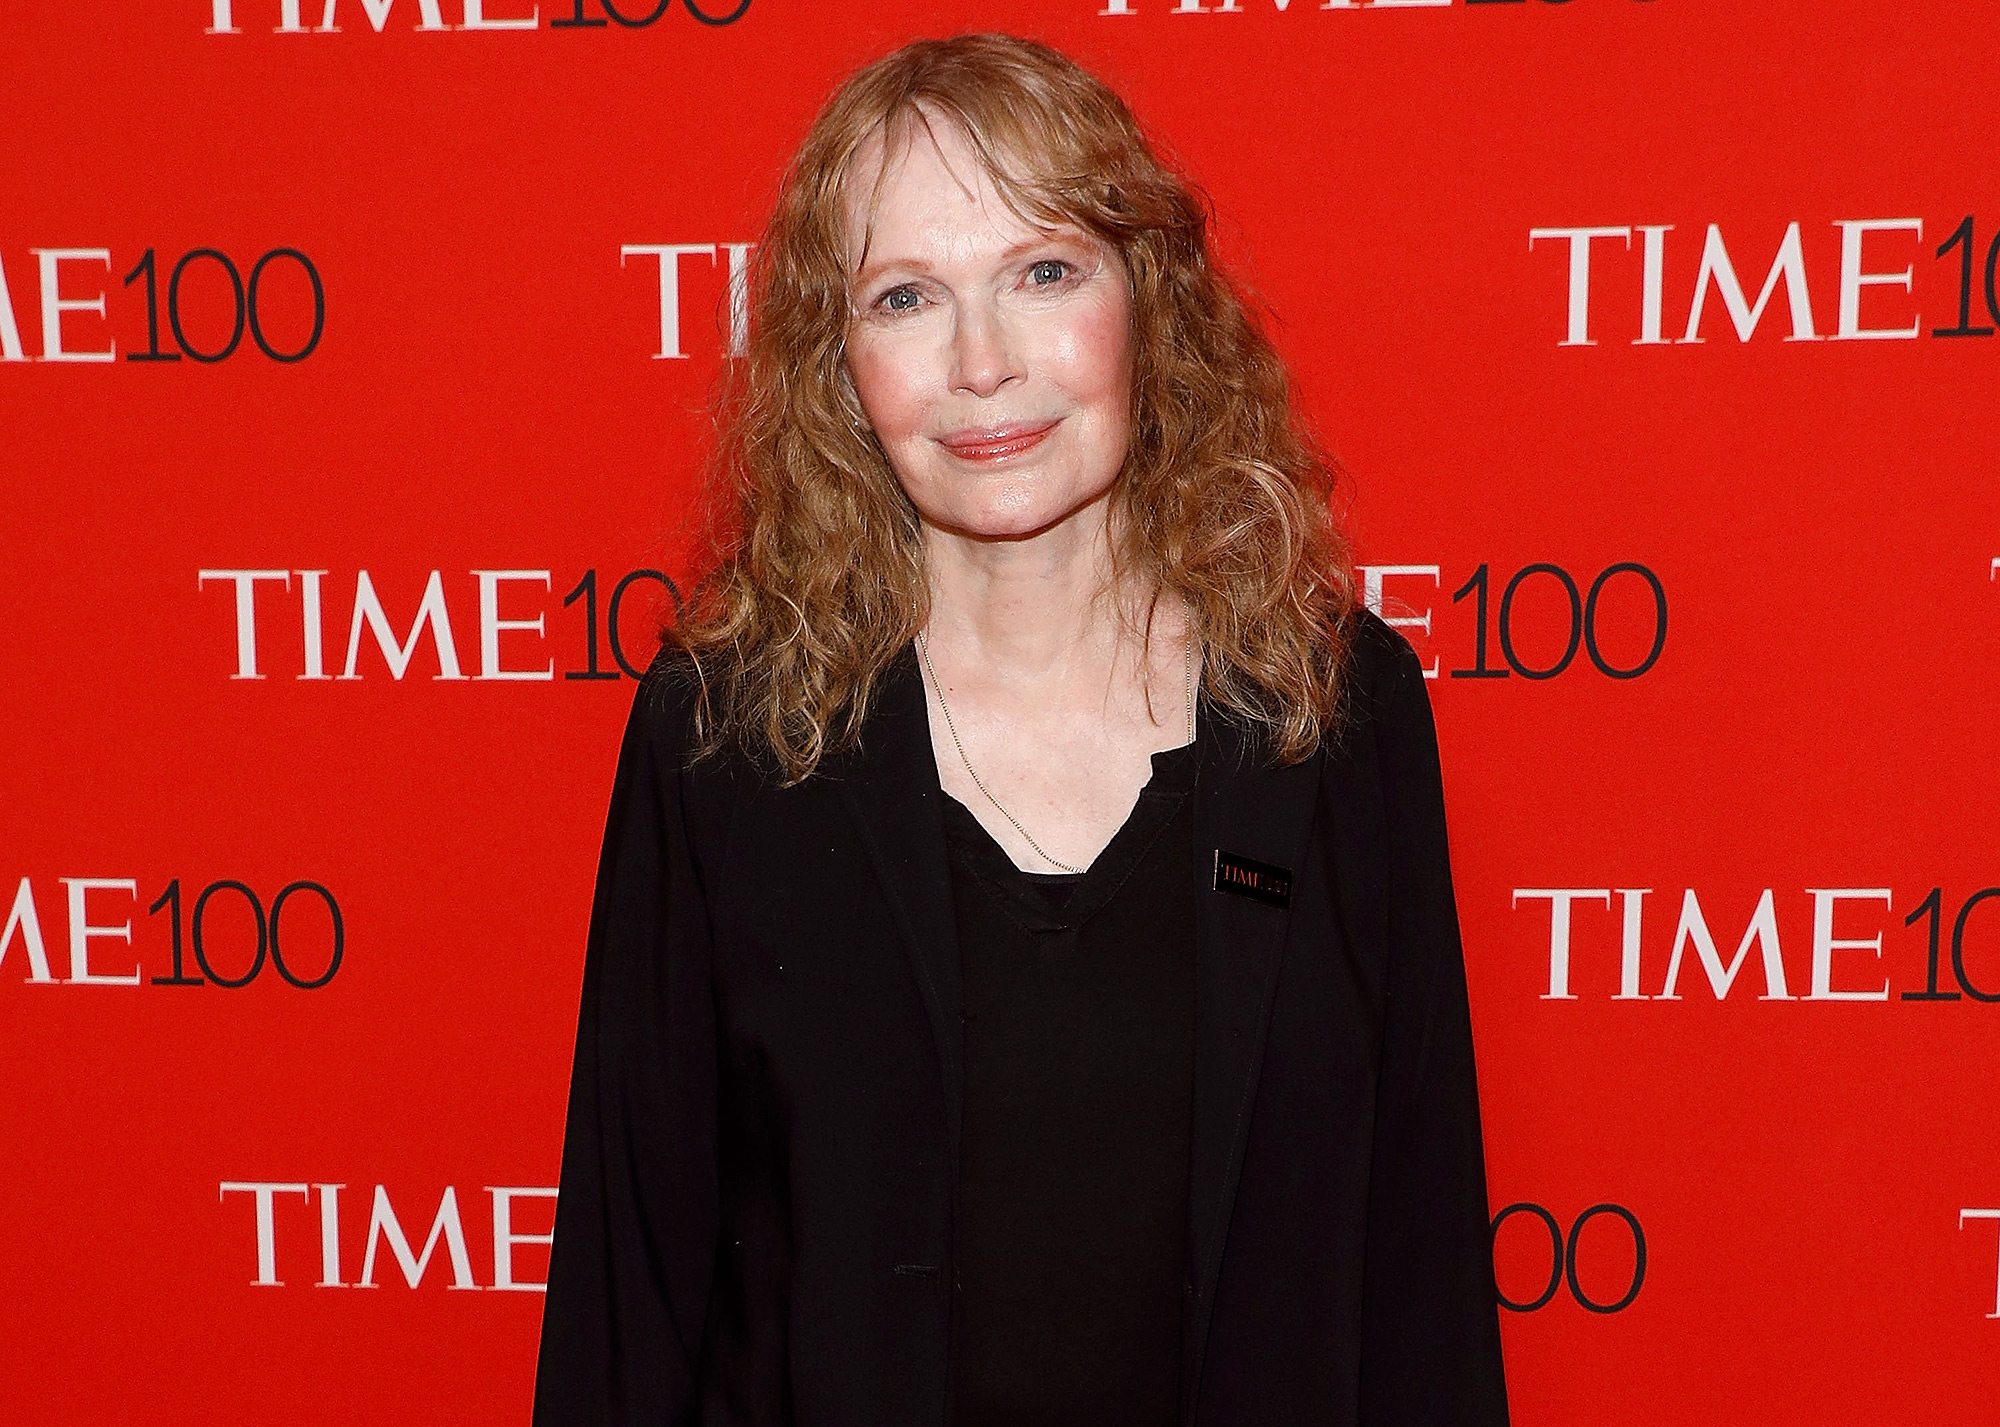 Mia Farrow discourses 'spiteful gossips' nearby the historical demises of her offspring